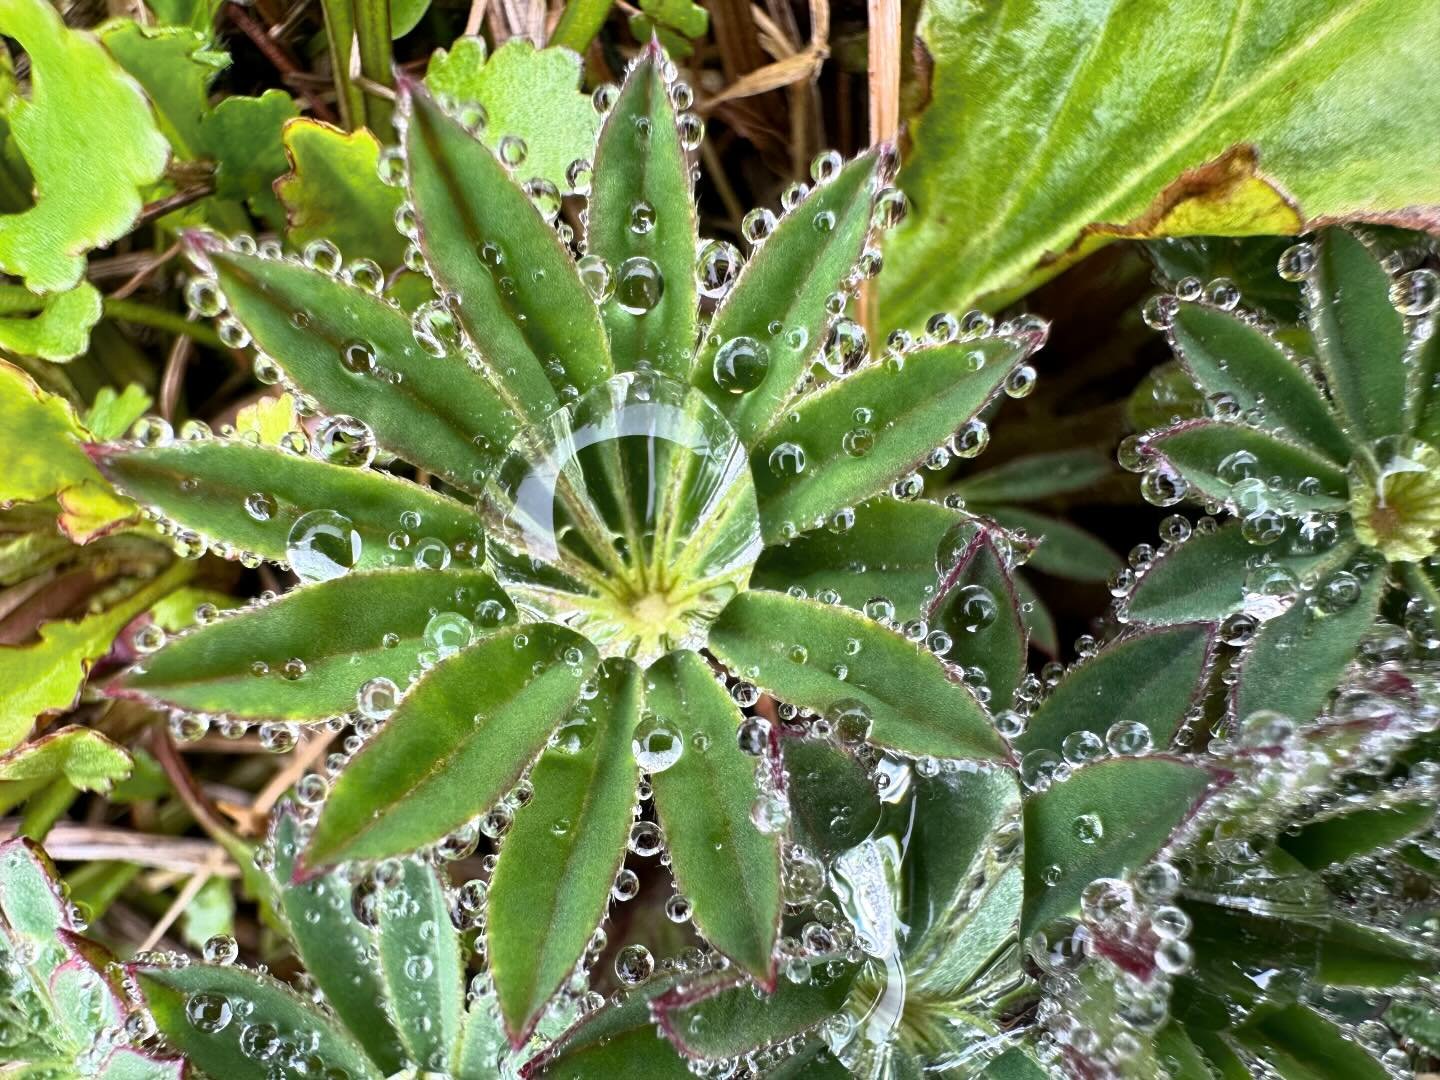 Magical morning rain droplets on the lupin leaves! Mother Nature is pretty amazing! Happy May! 
.
.
#may #mothernature #morningwalk #morningmeditation #morningmotivation #morninginspiration #waterwonders #vermontbyvermonters #vermontweddingvenue #ver